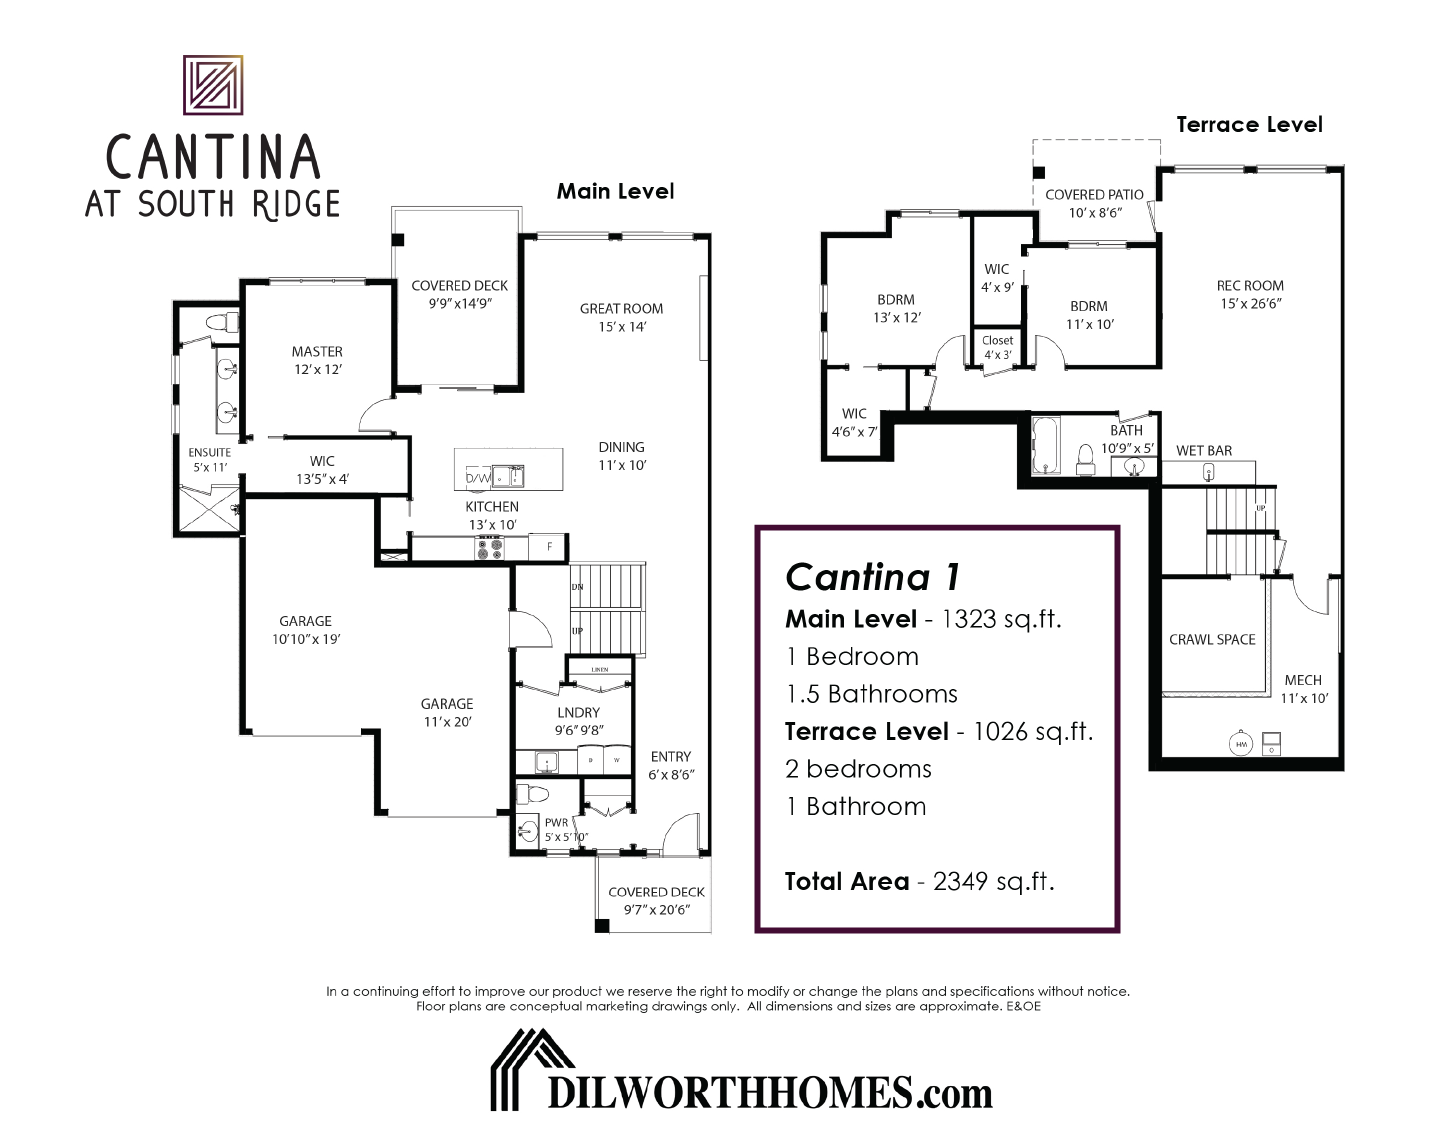 Cantina At South Ridge Dilworth Quality Homes